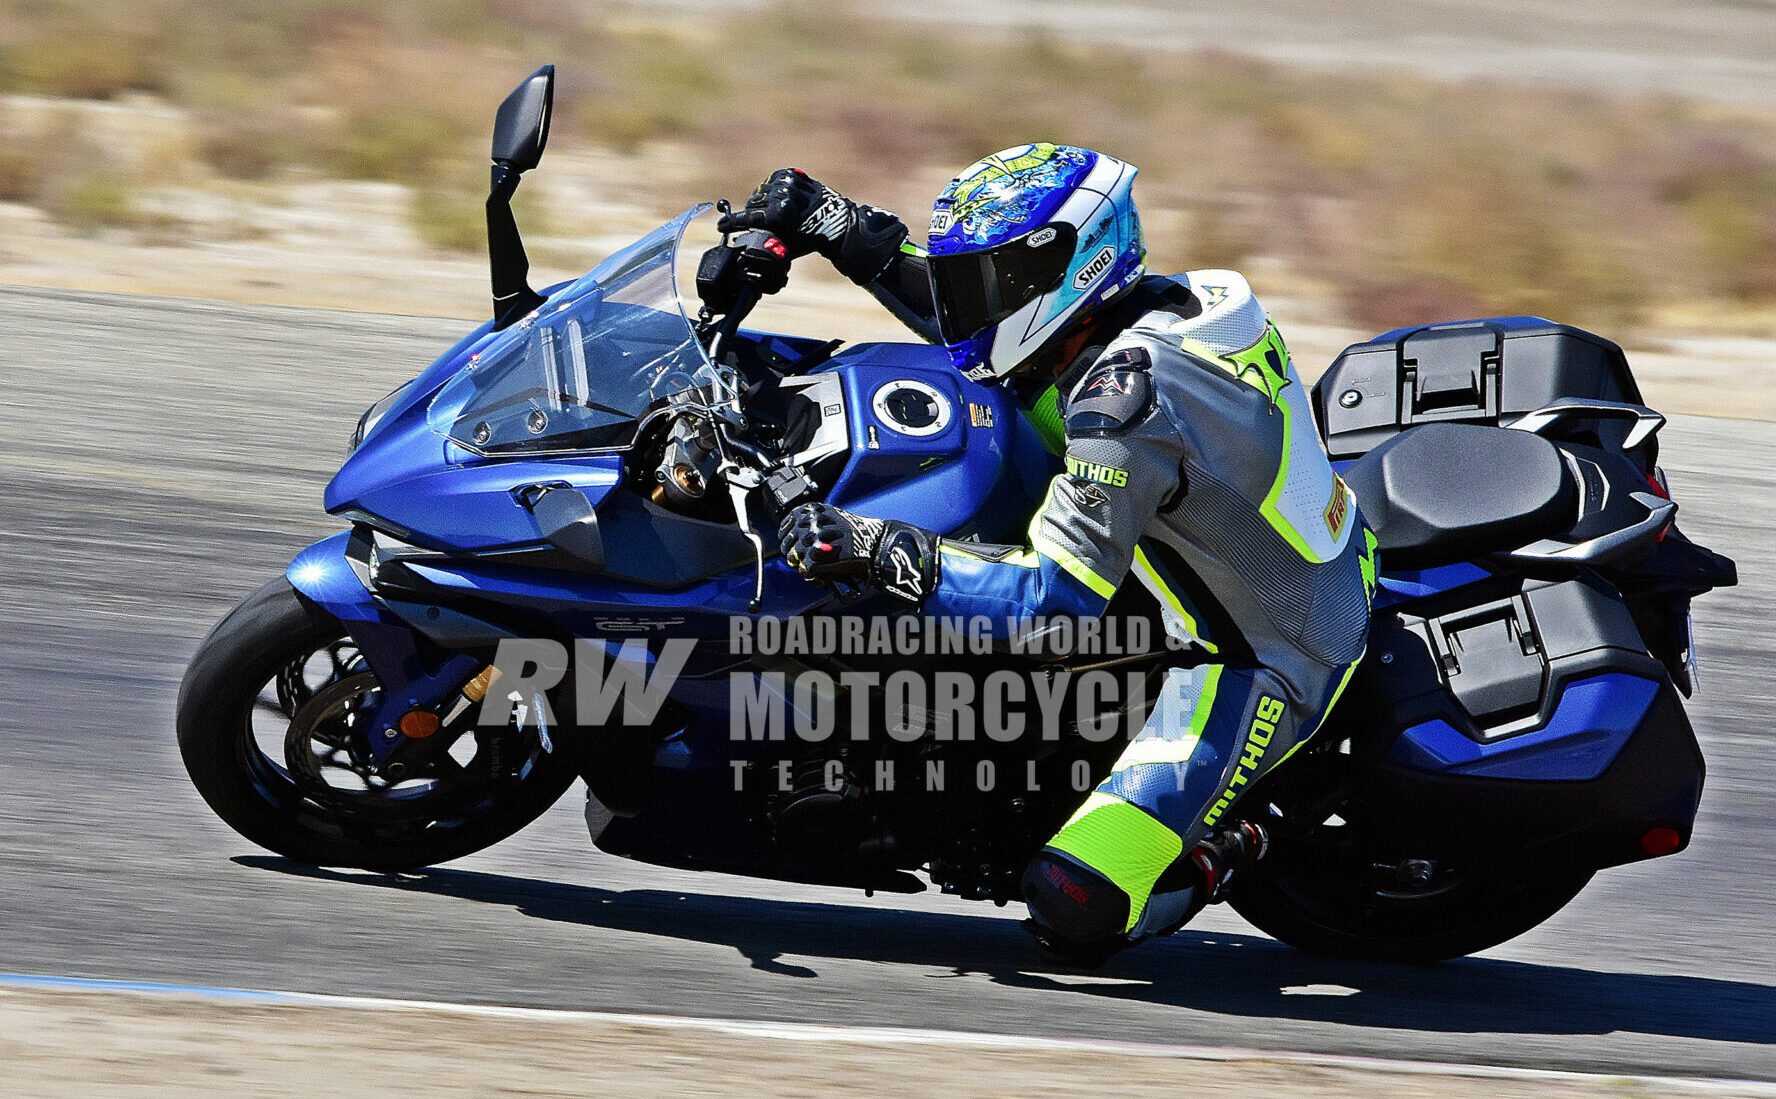 Racer Jeremy Toye and the GSX-S1000GT+ on track at Buttonwillow Raceway Park. Photo by Michael Gougis.